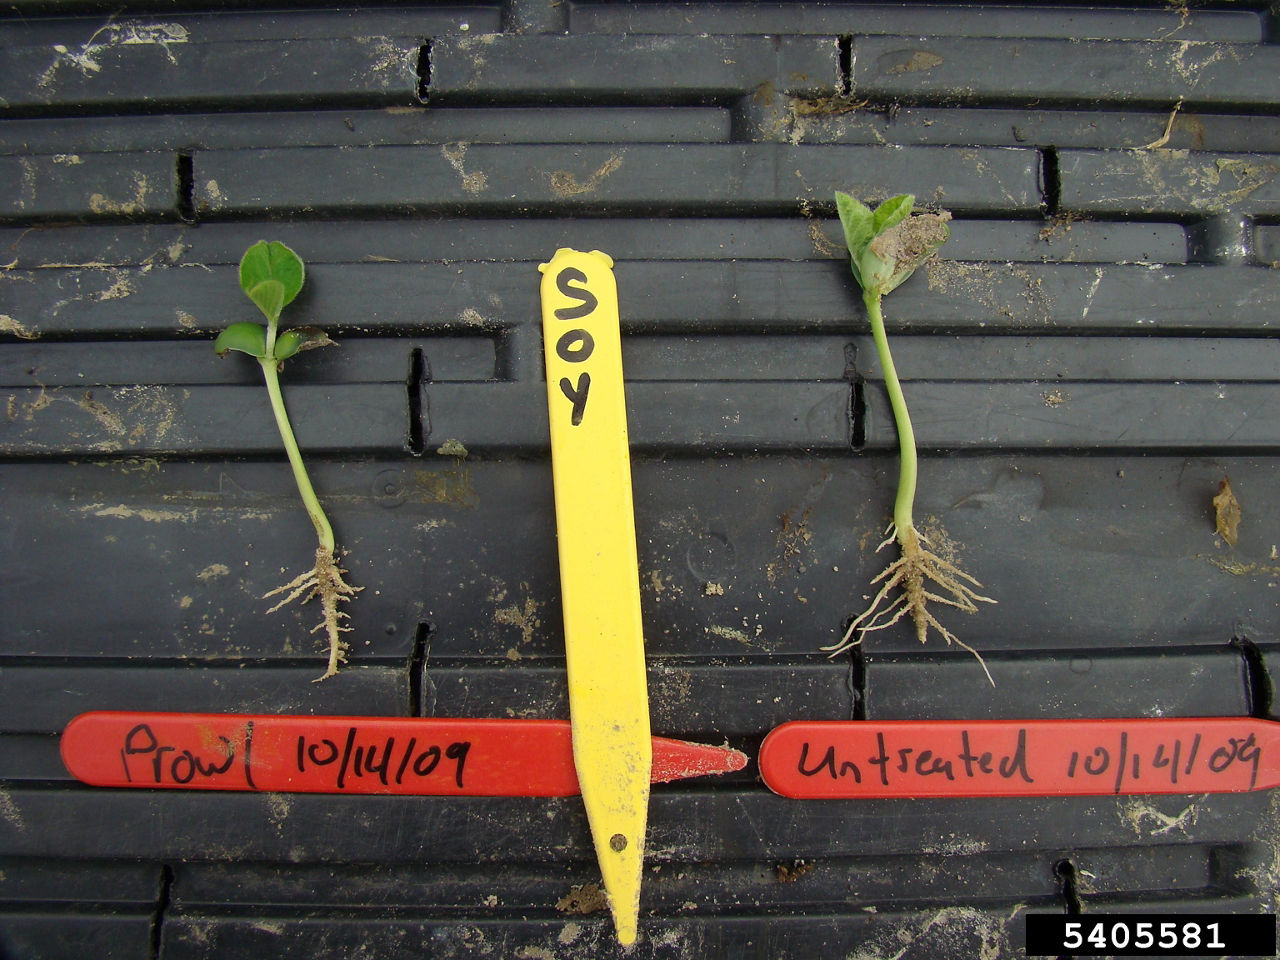 Short, stubby roots are a symptom of Group 3 herbicide activity. Mode of Action: Mitotic Inhibitors, Microtubule Inhibitors, Seedling Growth Inhibitors